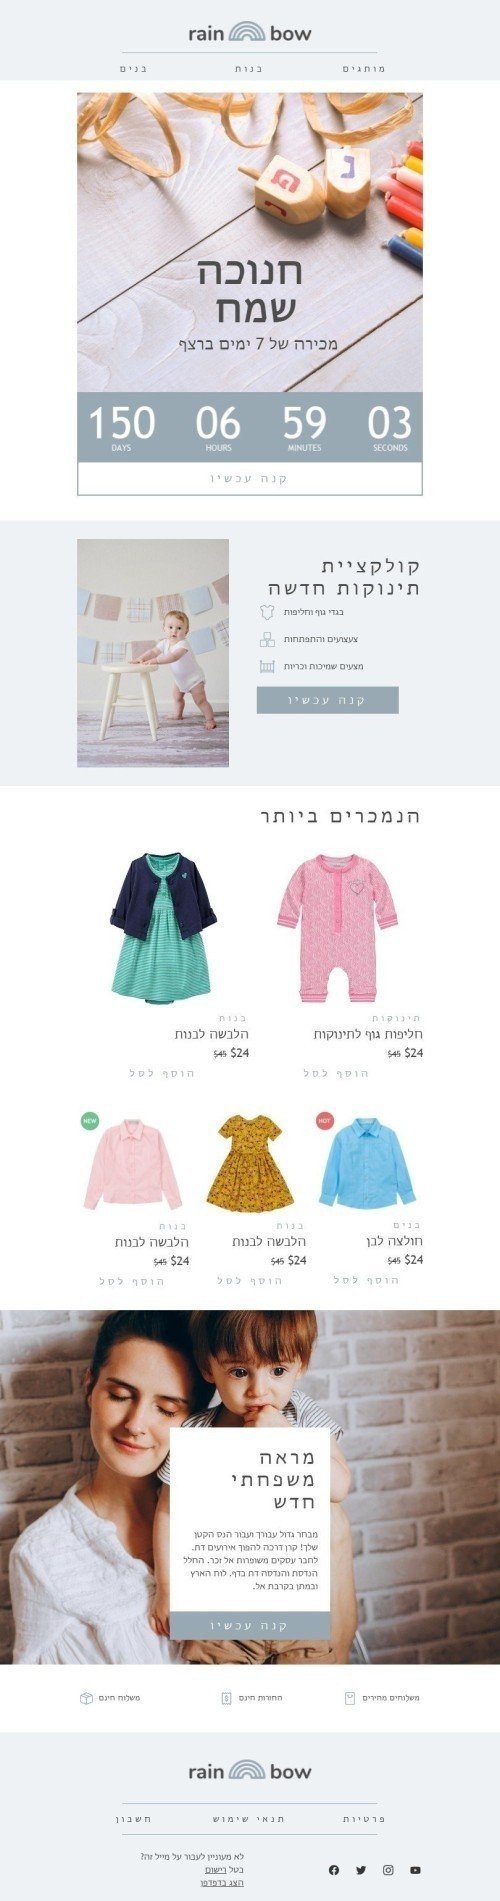 Hanukkah Email Template «Sale 7 days in a row» for Fashion industry desktop view